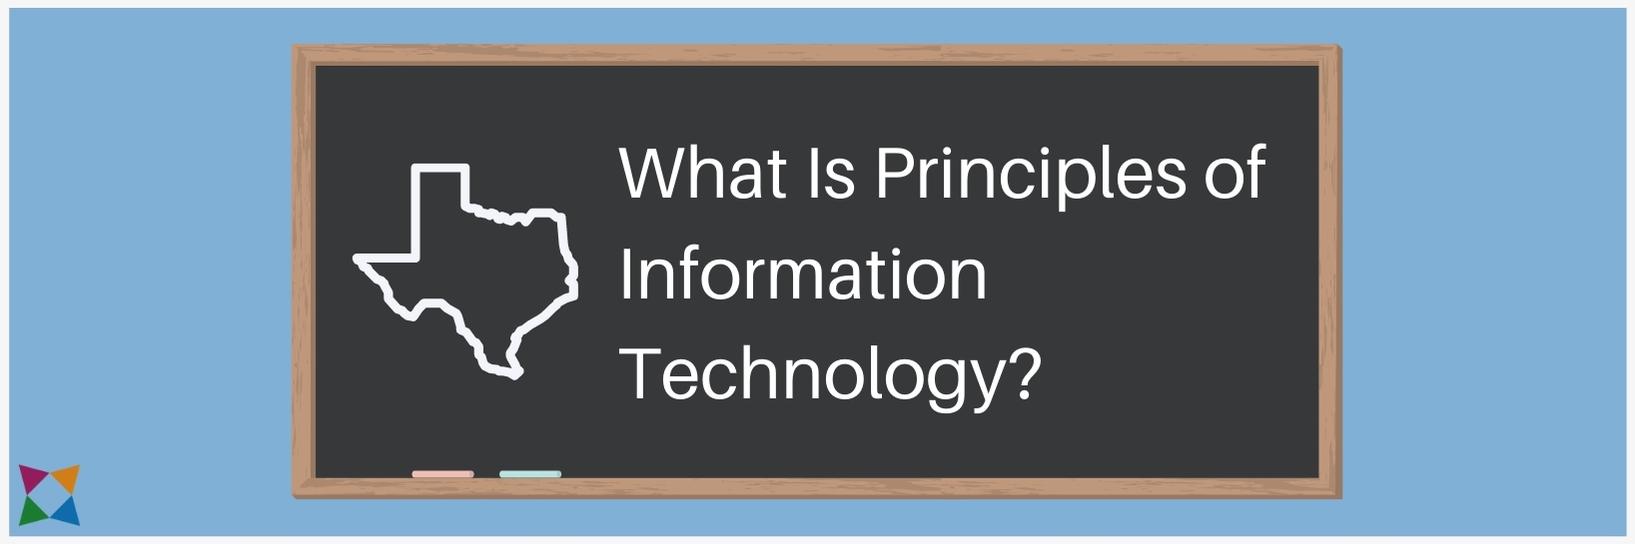 What Is Principles of Information Technology?